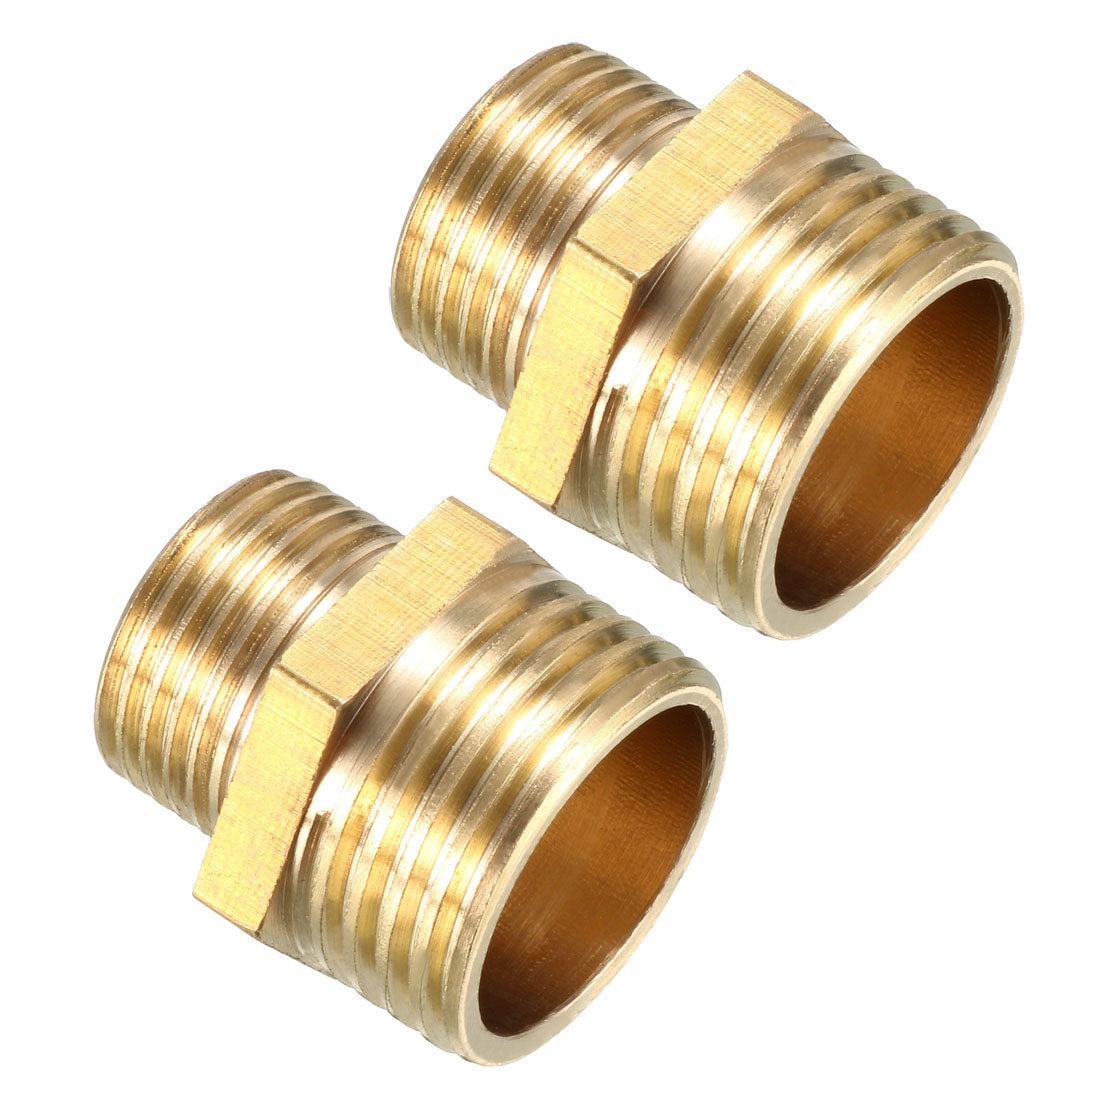 uxcell Uxcell Brass Pipe Fitting Reducing Hex Bushing 1/2 BSP Male x 3/8 BSP Male Adapter 2pcs